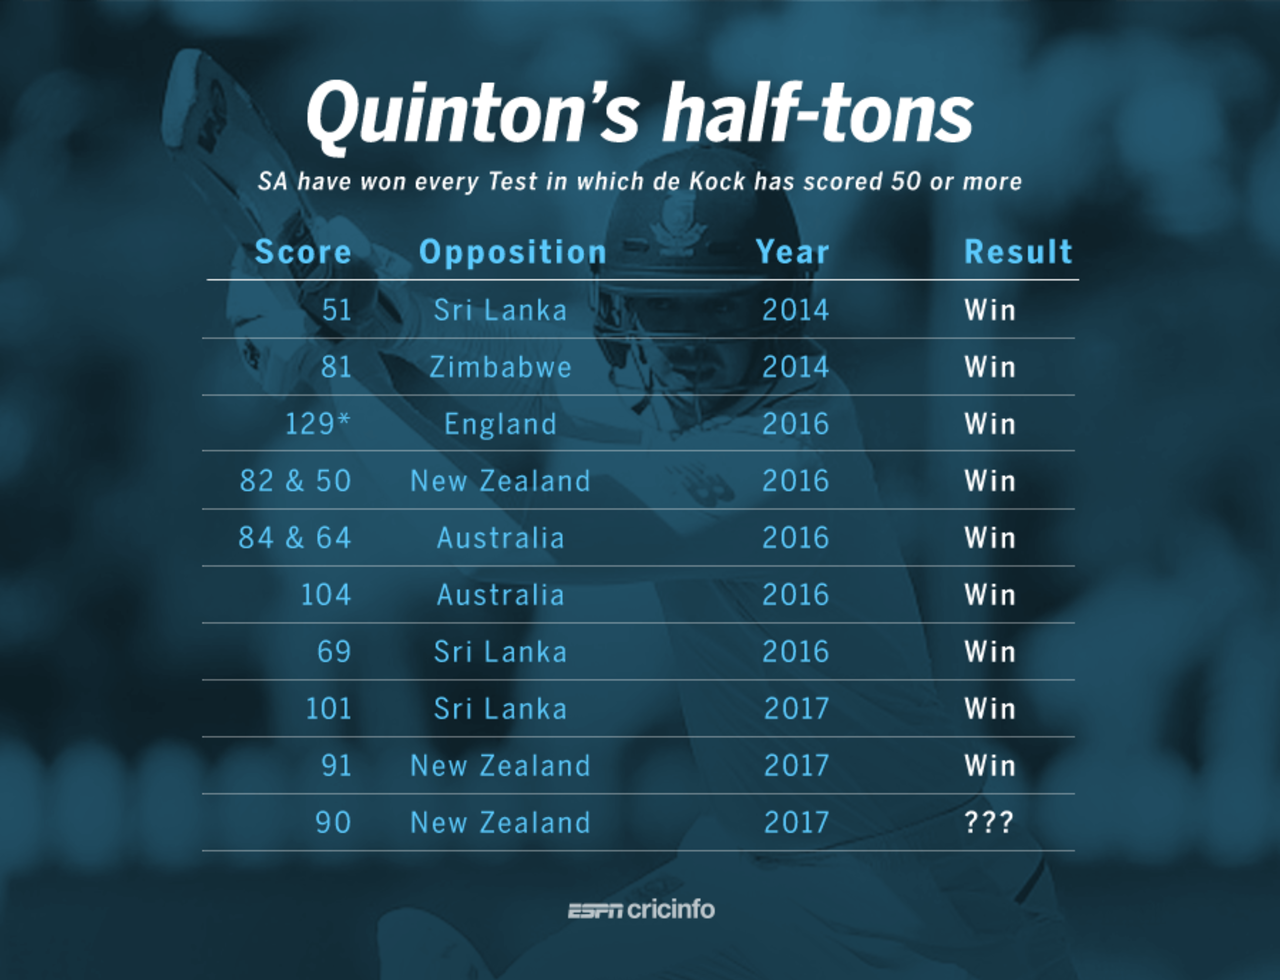 Graphic: South Africa have won every Test in which Quinton de Kock has scored a 50 or more 